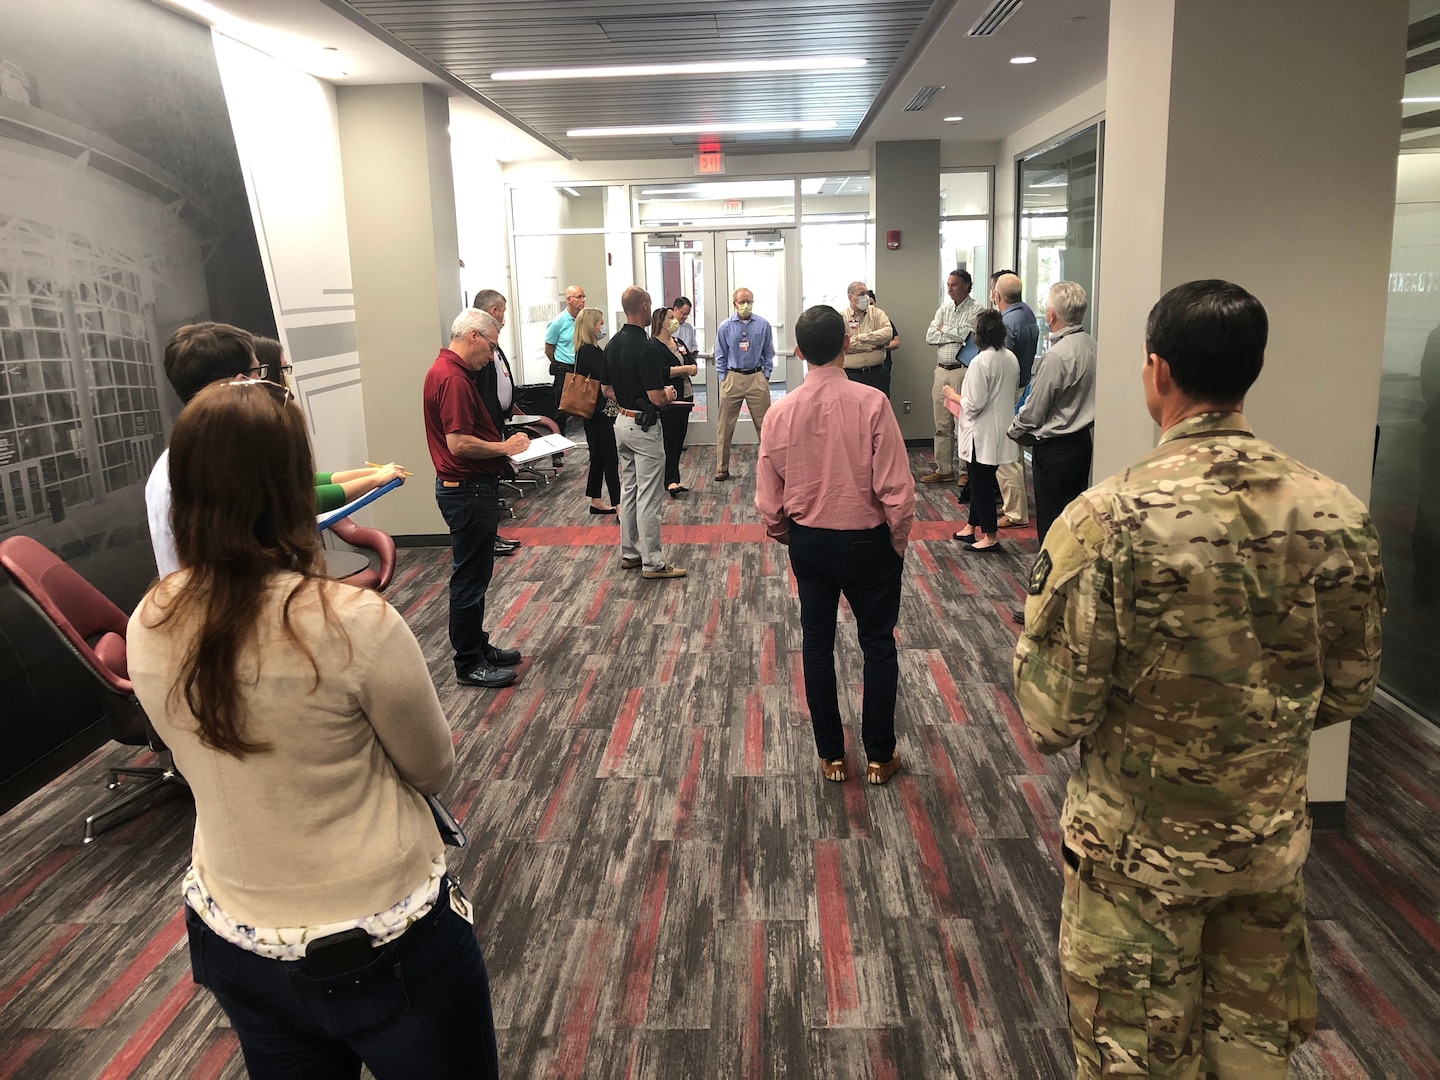 The South Carolina National Guard works with state and federal agencies as a task force to conduct engineer assessments of sites throughout the state that could be used as alternate care facilities should there be a surge of COVID-19 patients at hospitals.